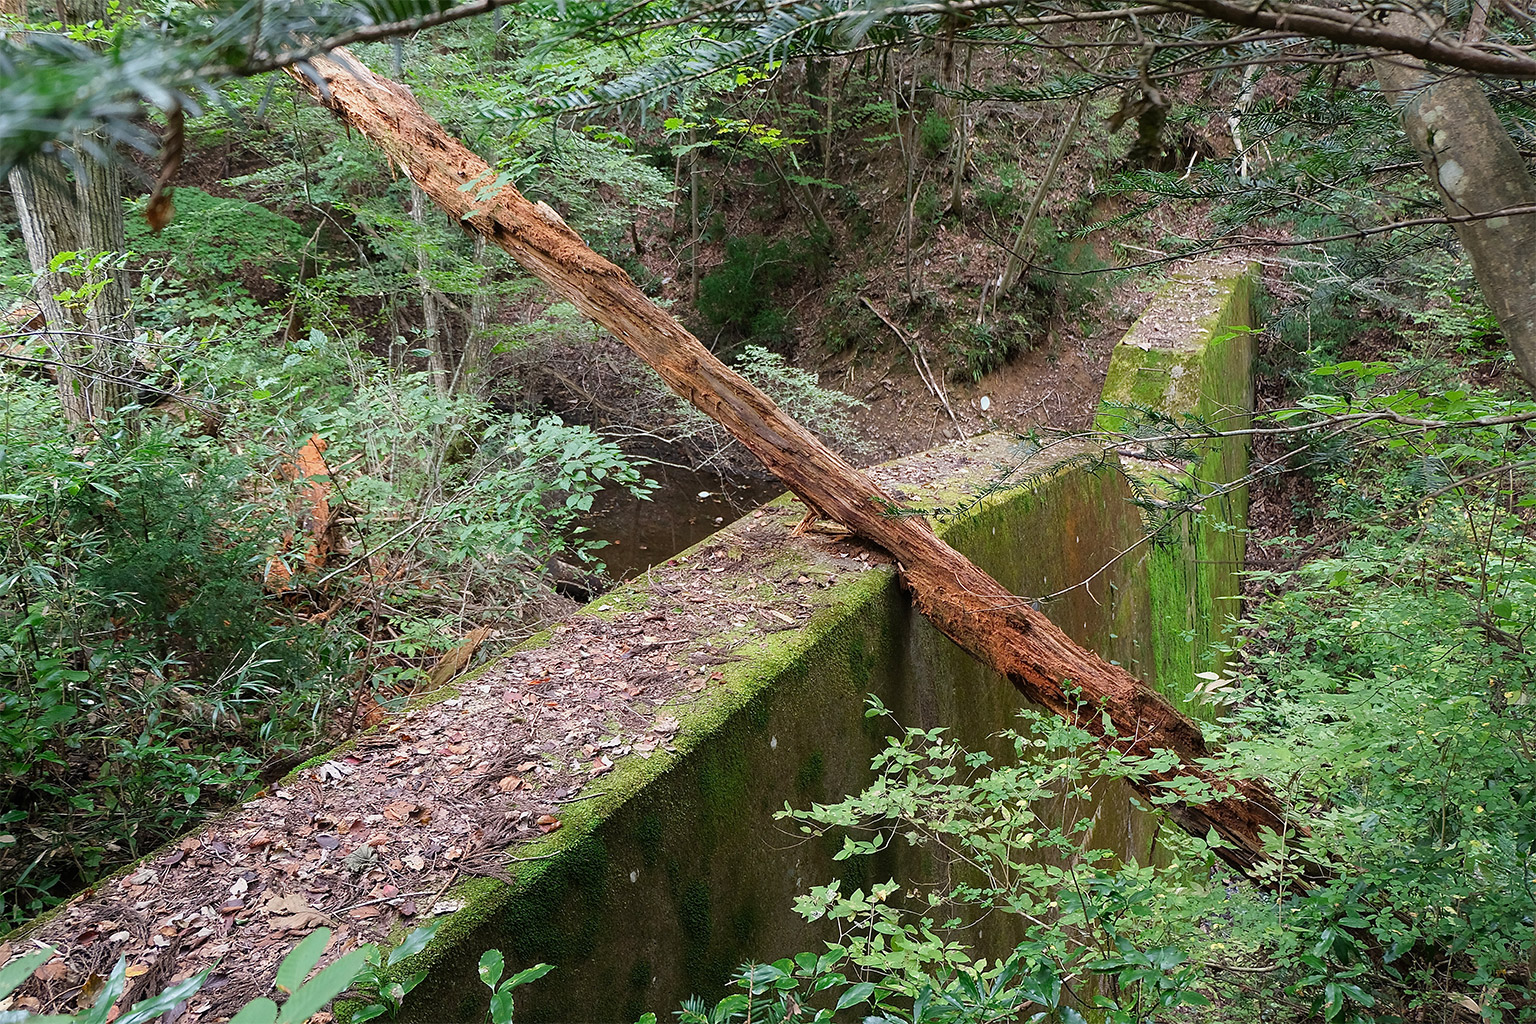 A concrete dam in a chisan forest.